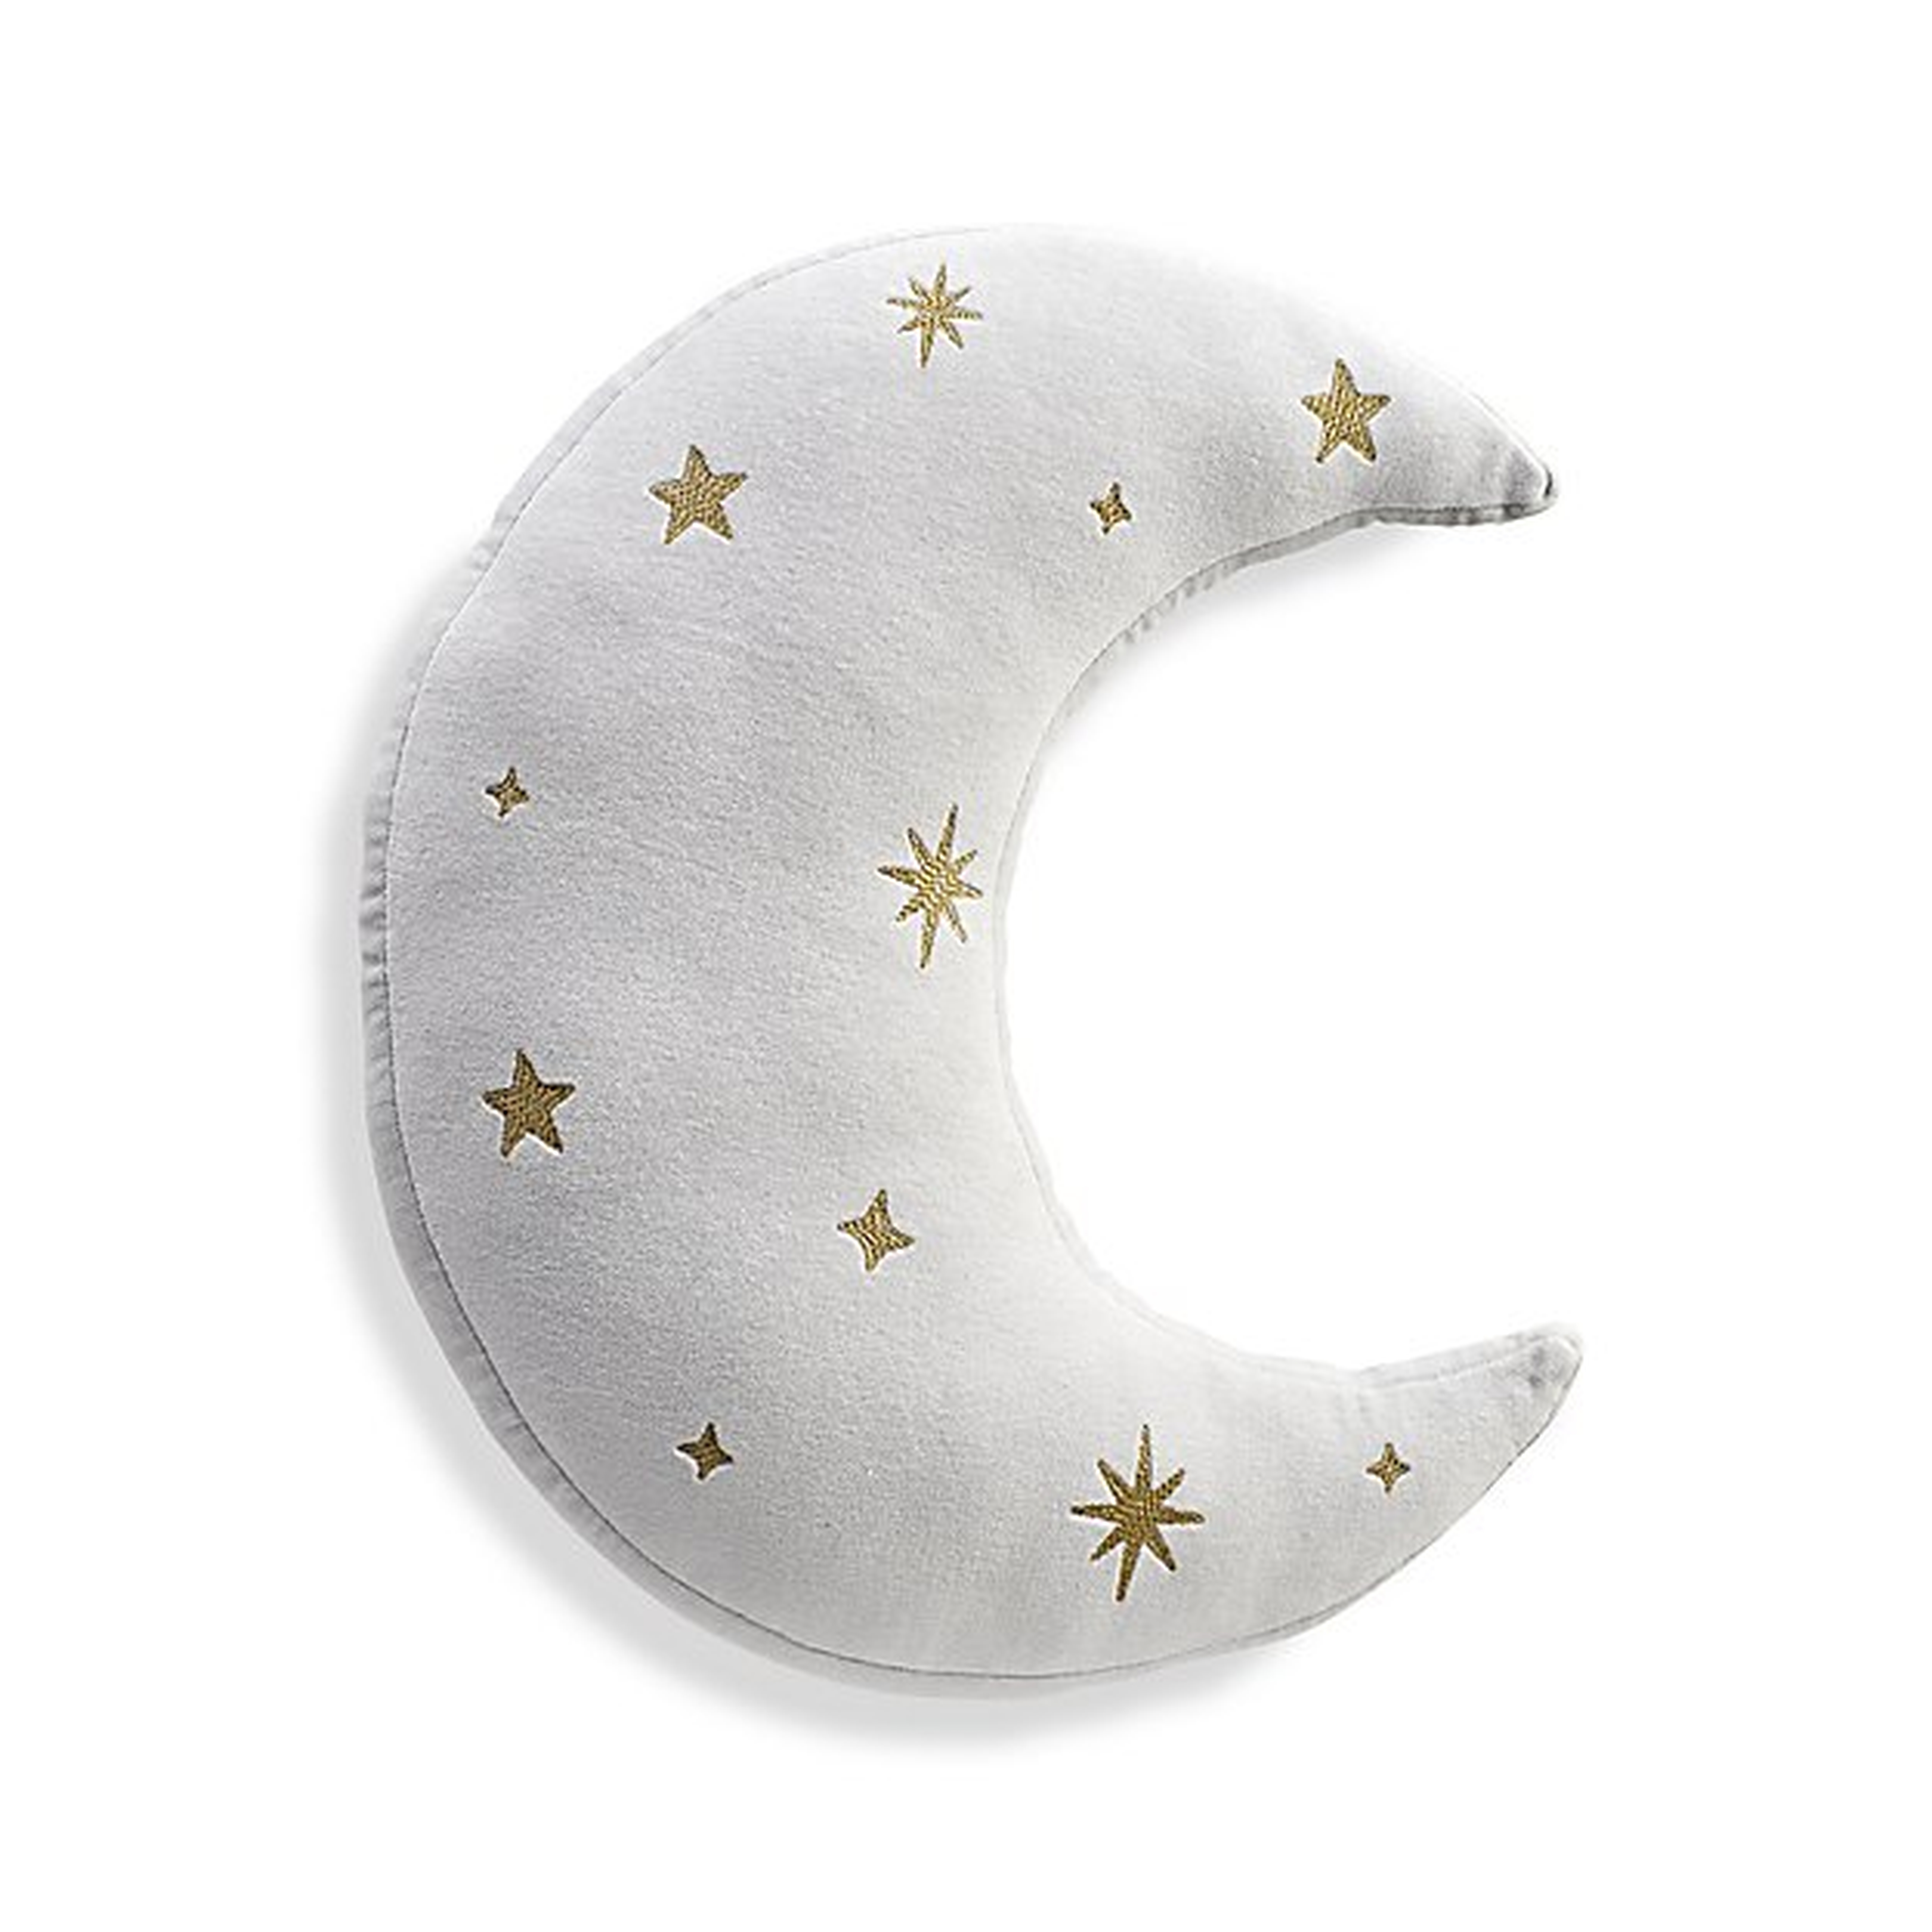 Crescent Moon Throw Pillow - Crate and Barrel